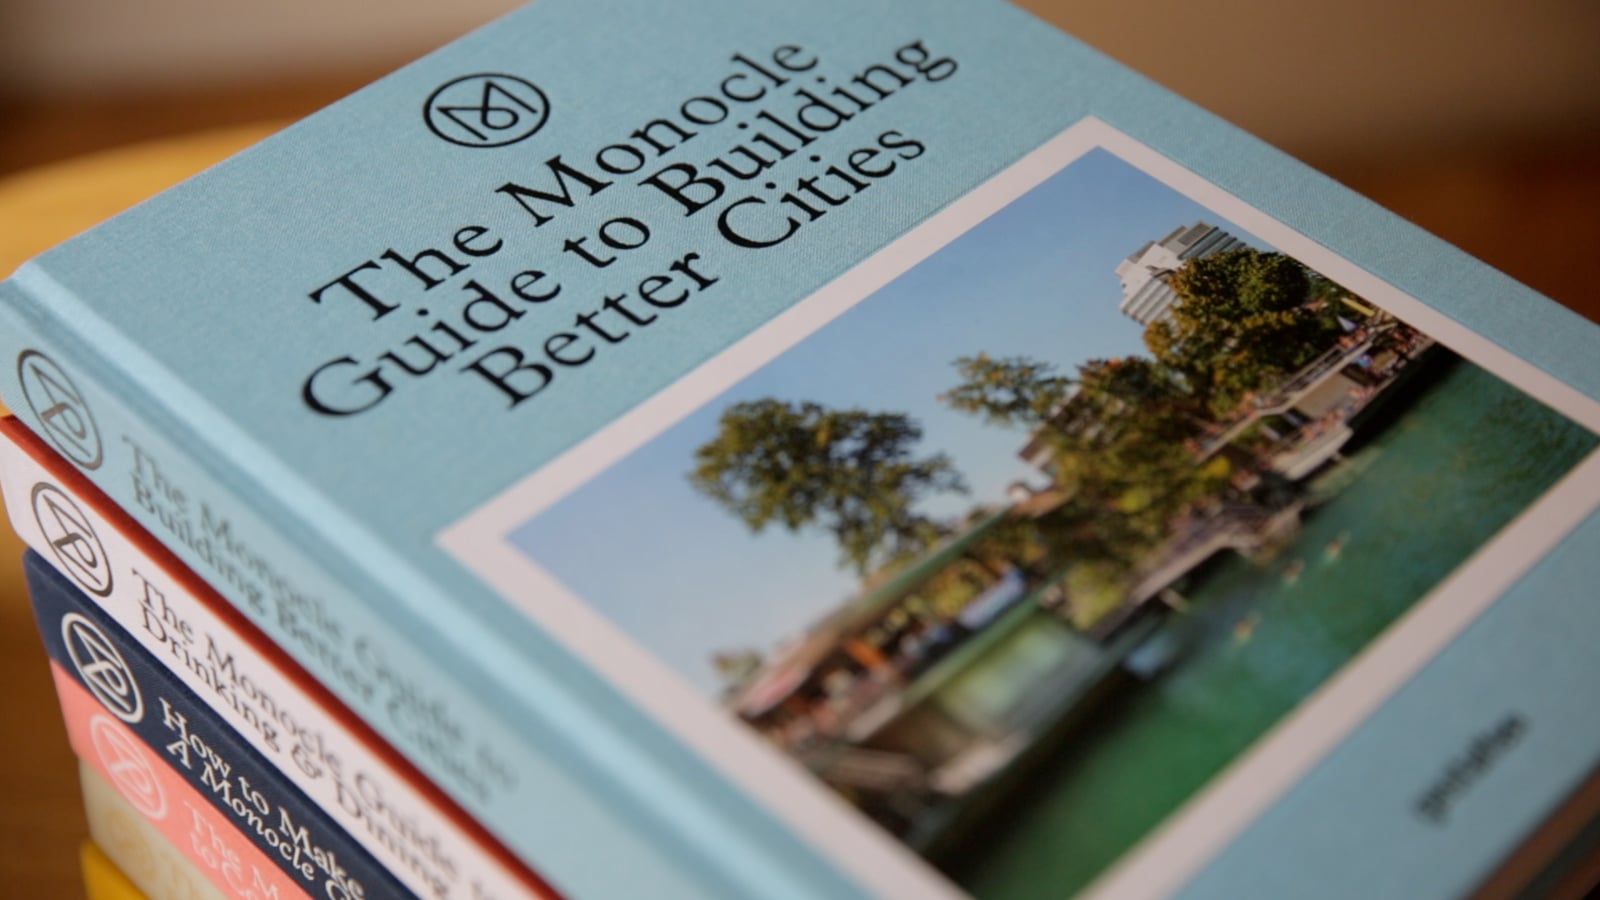 The Monocle Guide to Building Better Cities